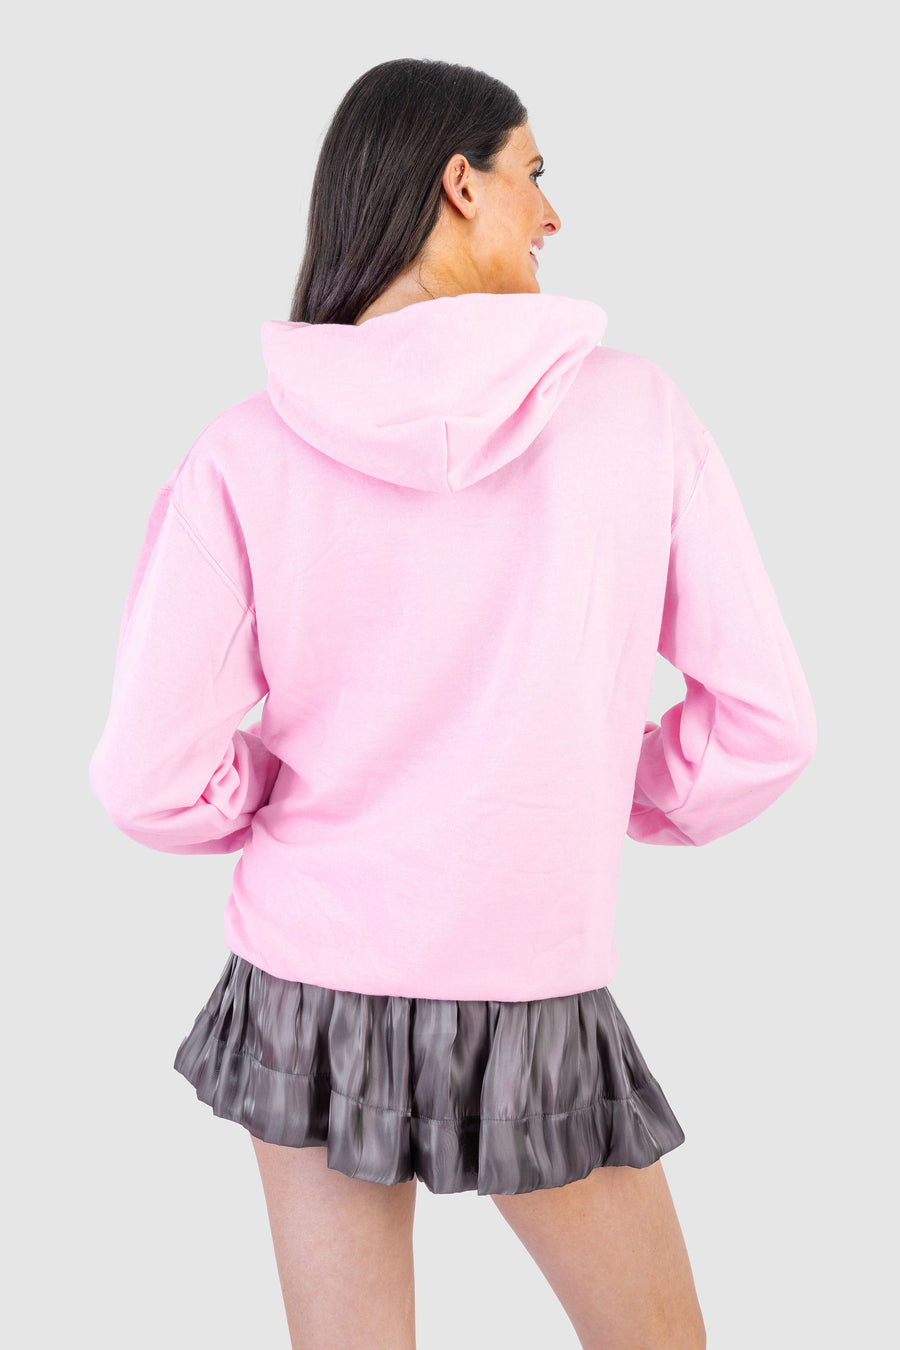 KOCH Grace Hoodie Pink *Limited*Edition*